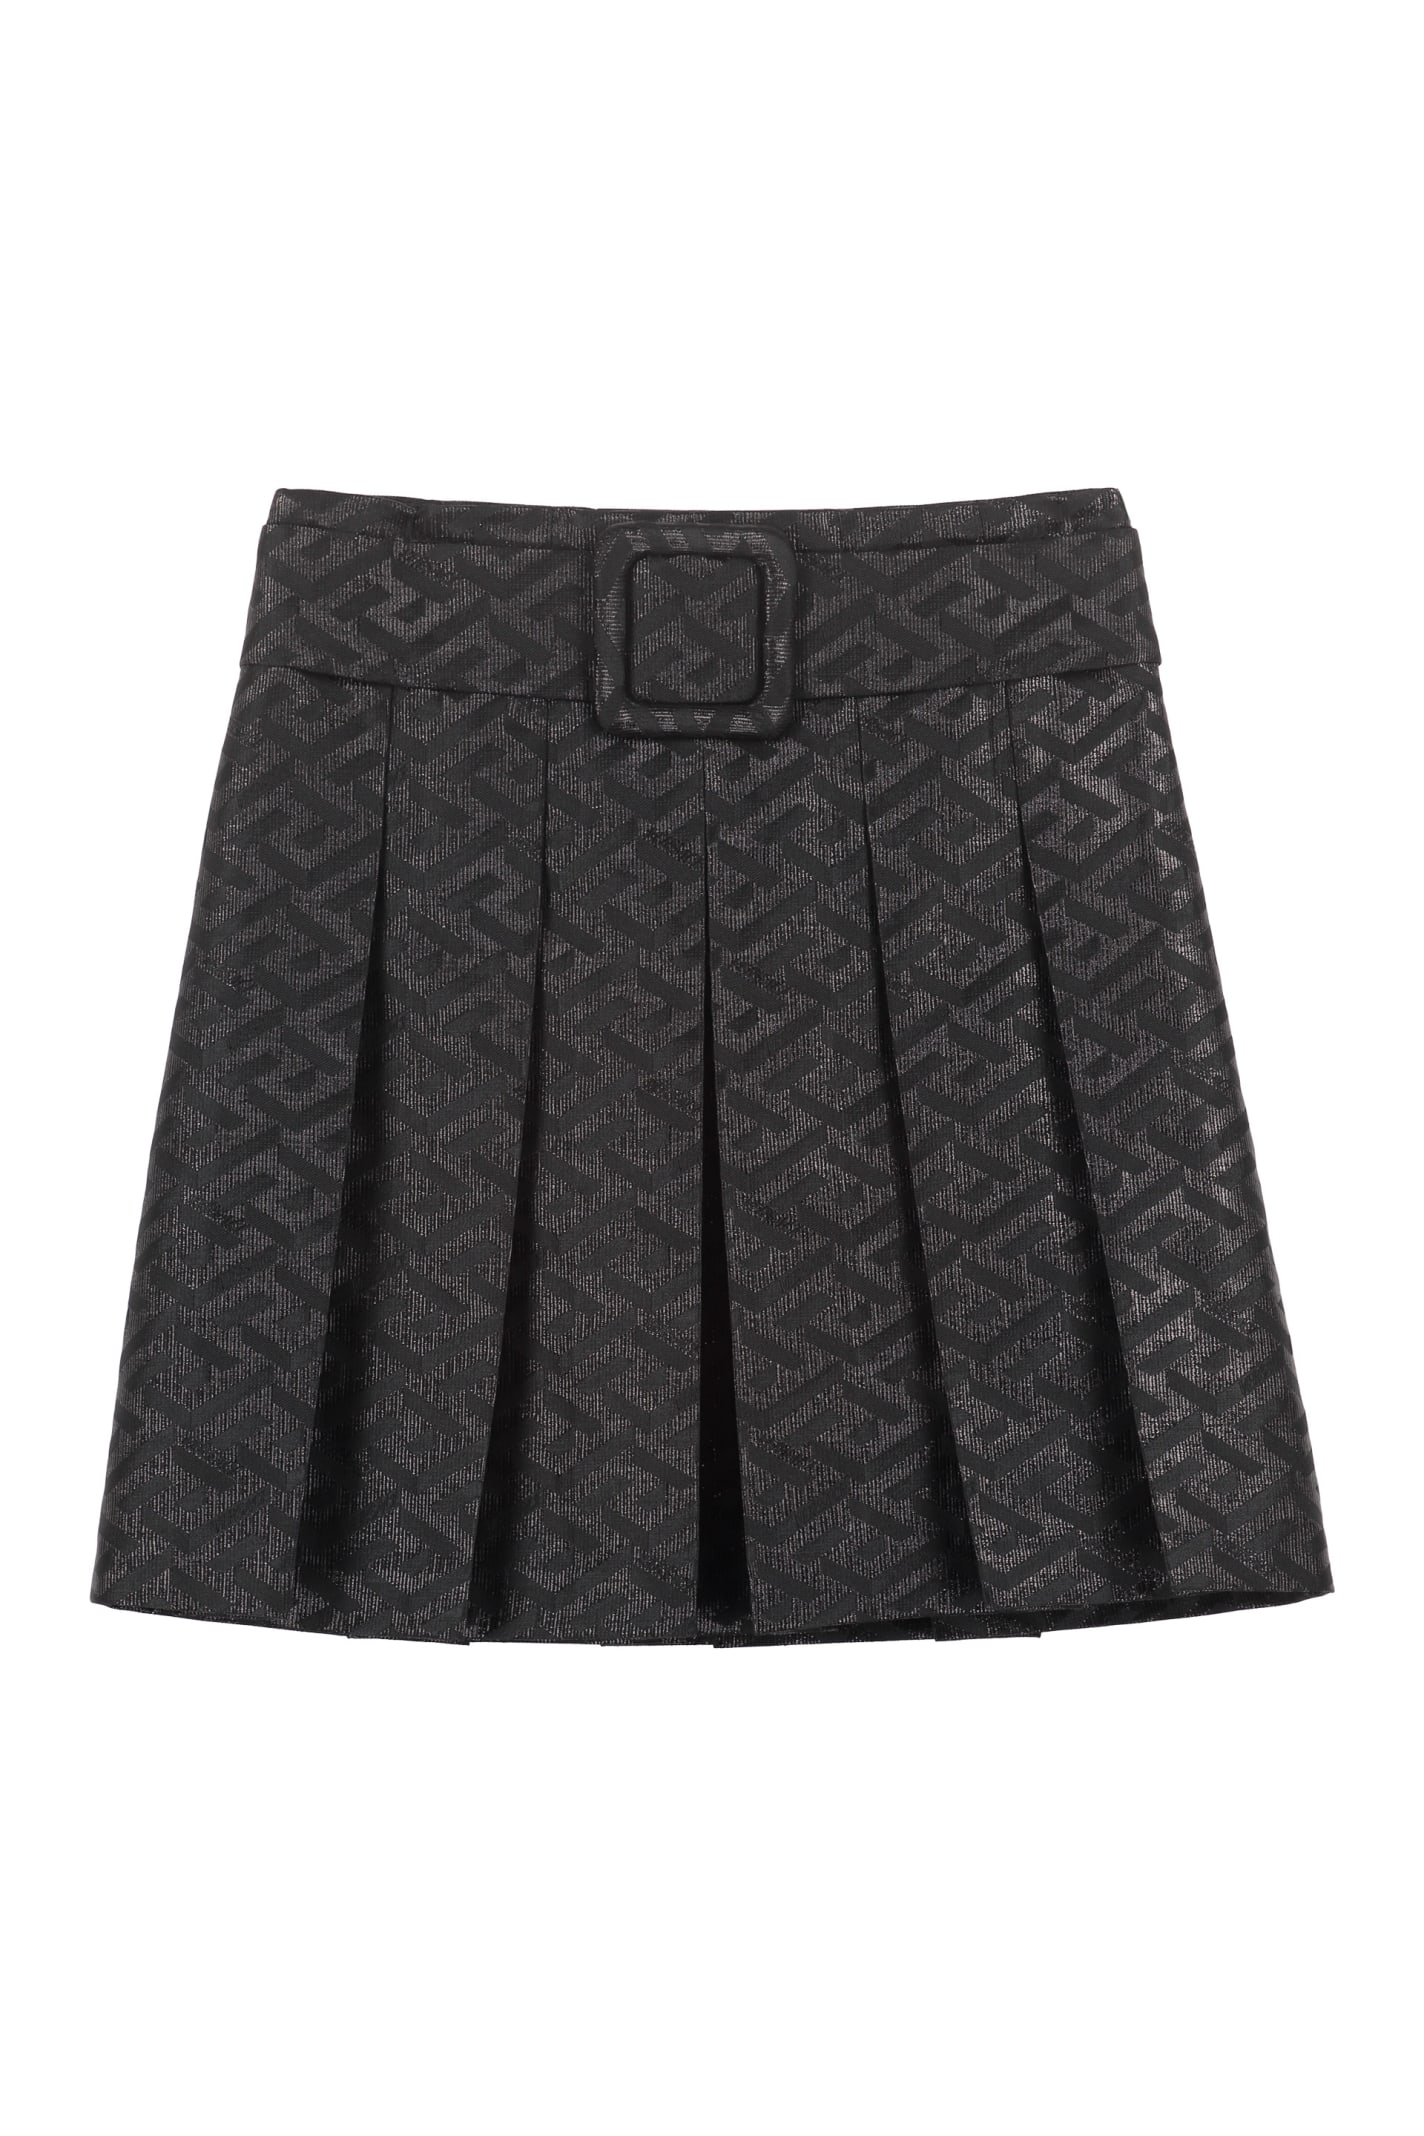 Young Versace Pleated Mini Skirt